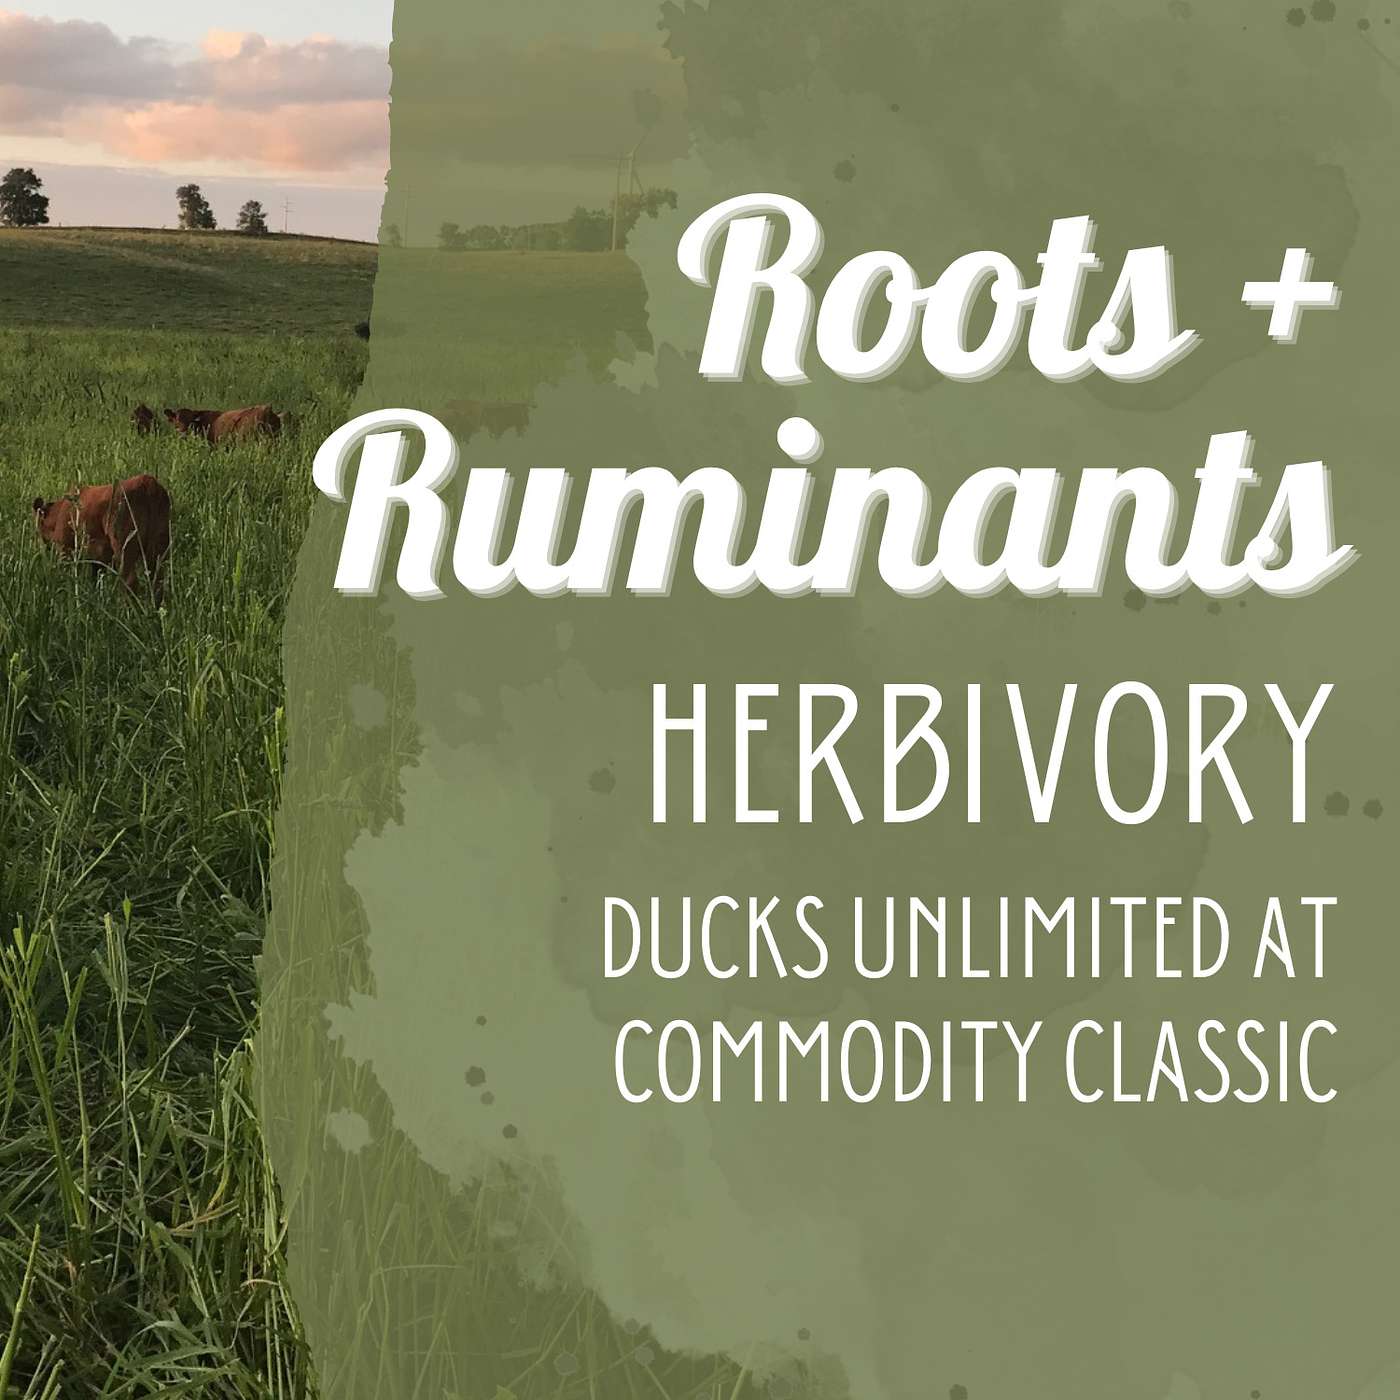 Herbivory | Ducks Unlimited at Commodity Classic cover art